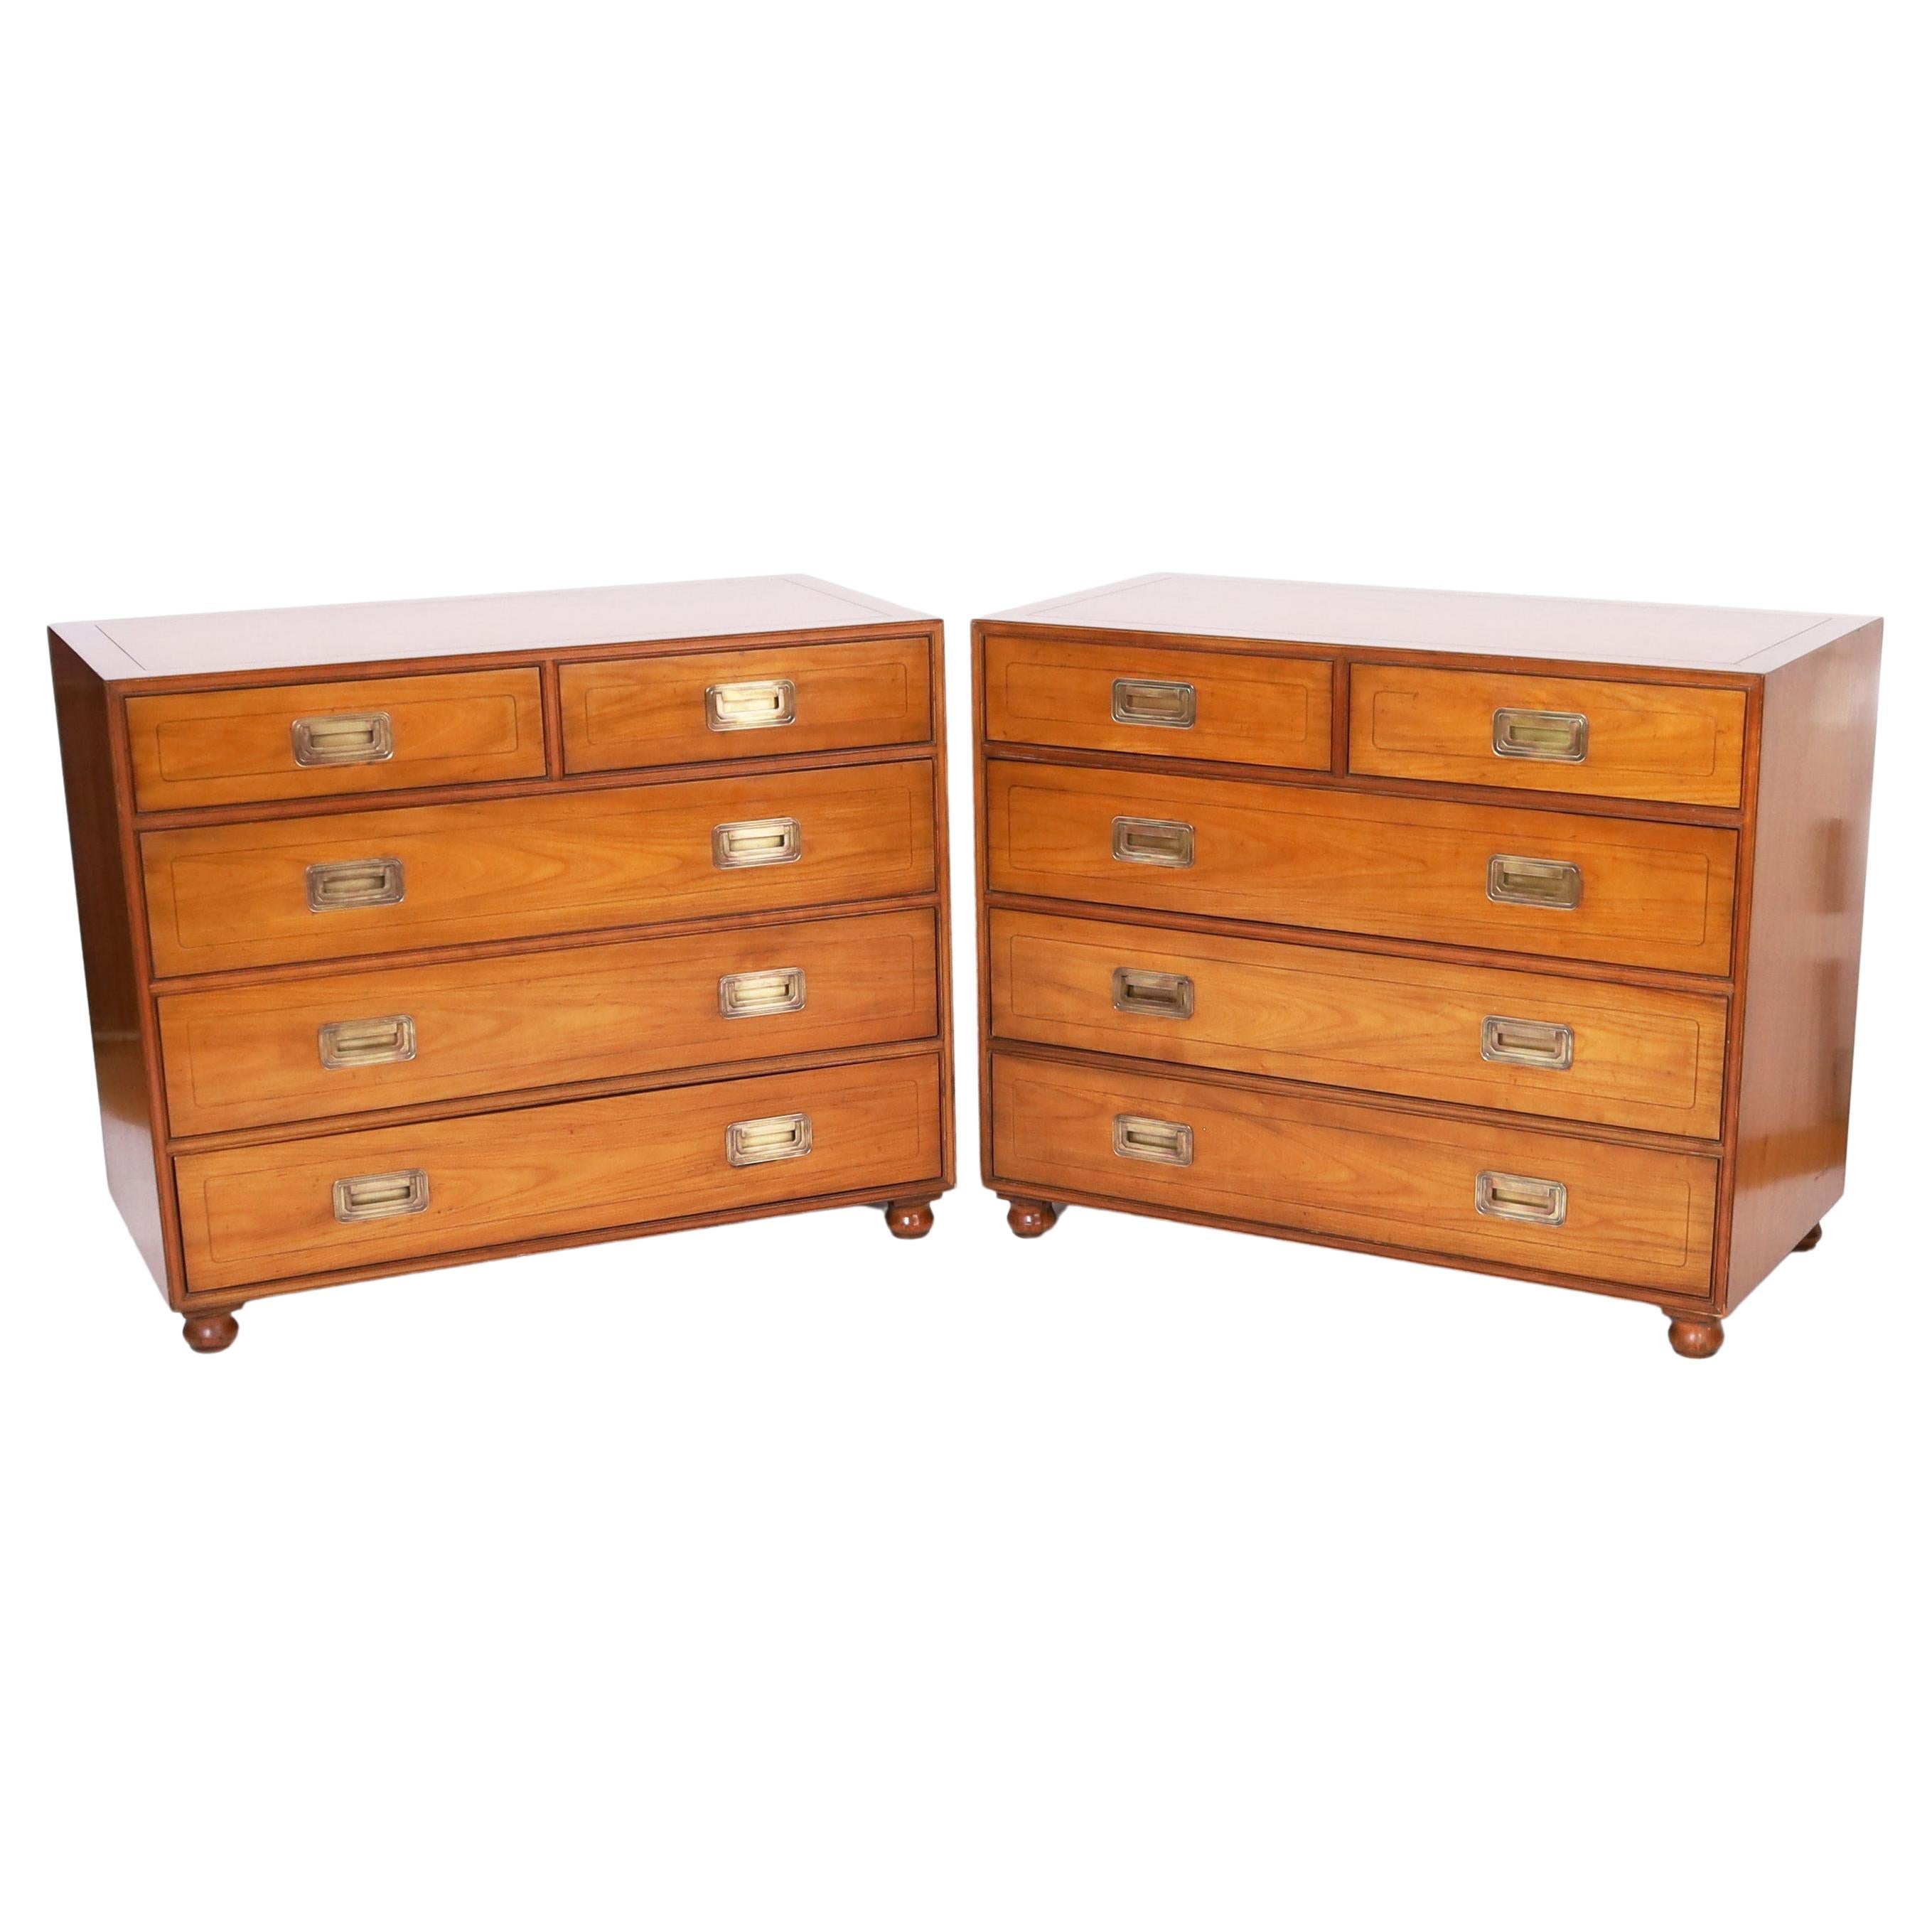  Pair of Baker Fruitwood Campaign Style Chests